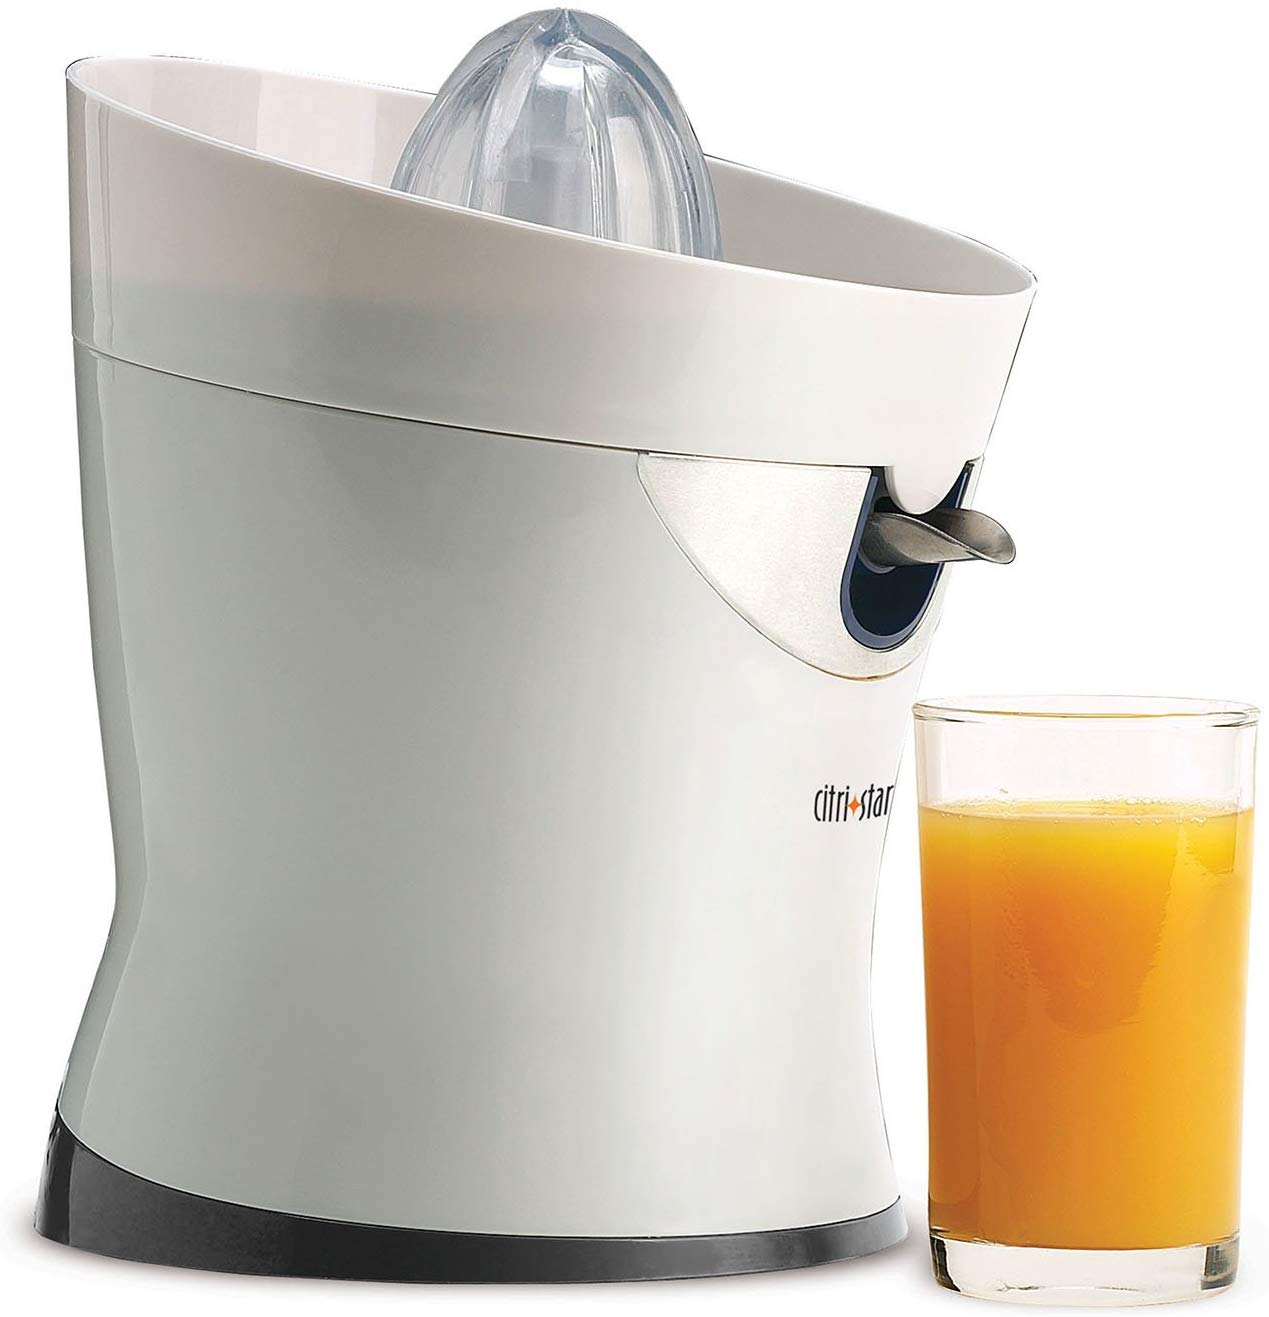 Read more about the article Tribest – Citristar Juicer